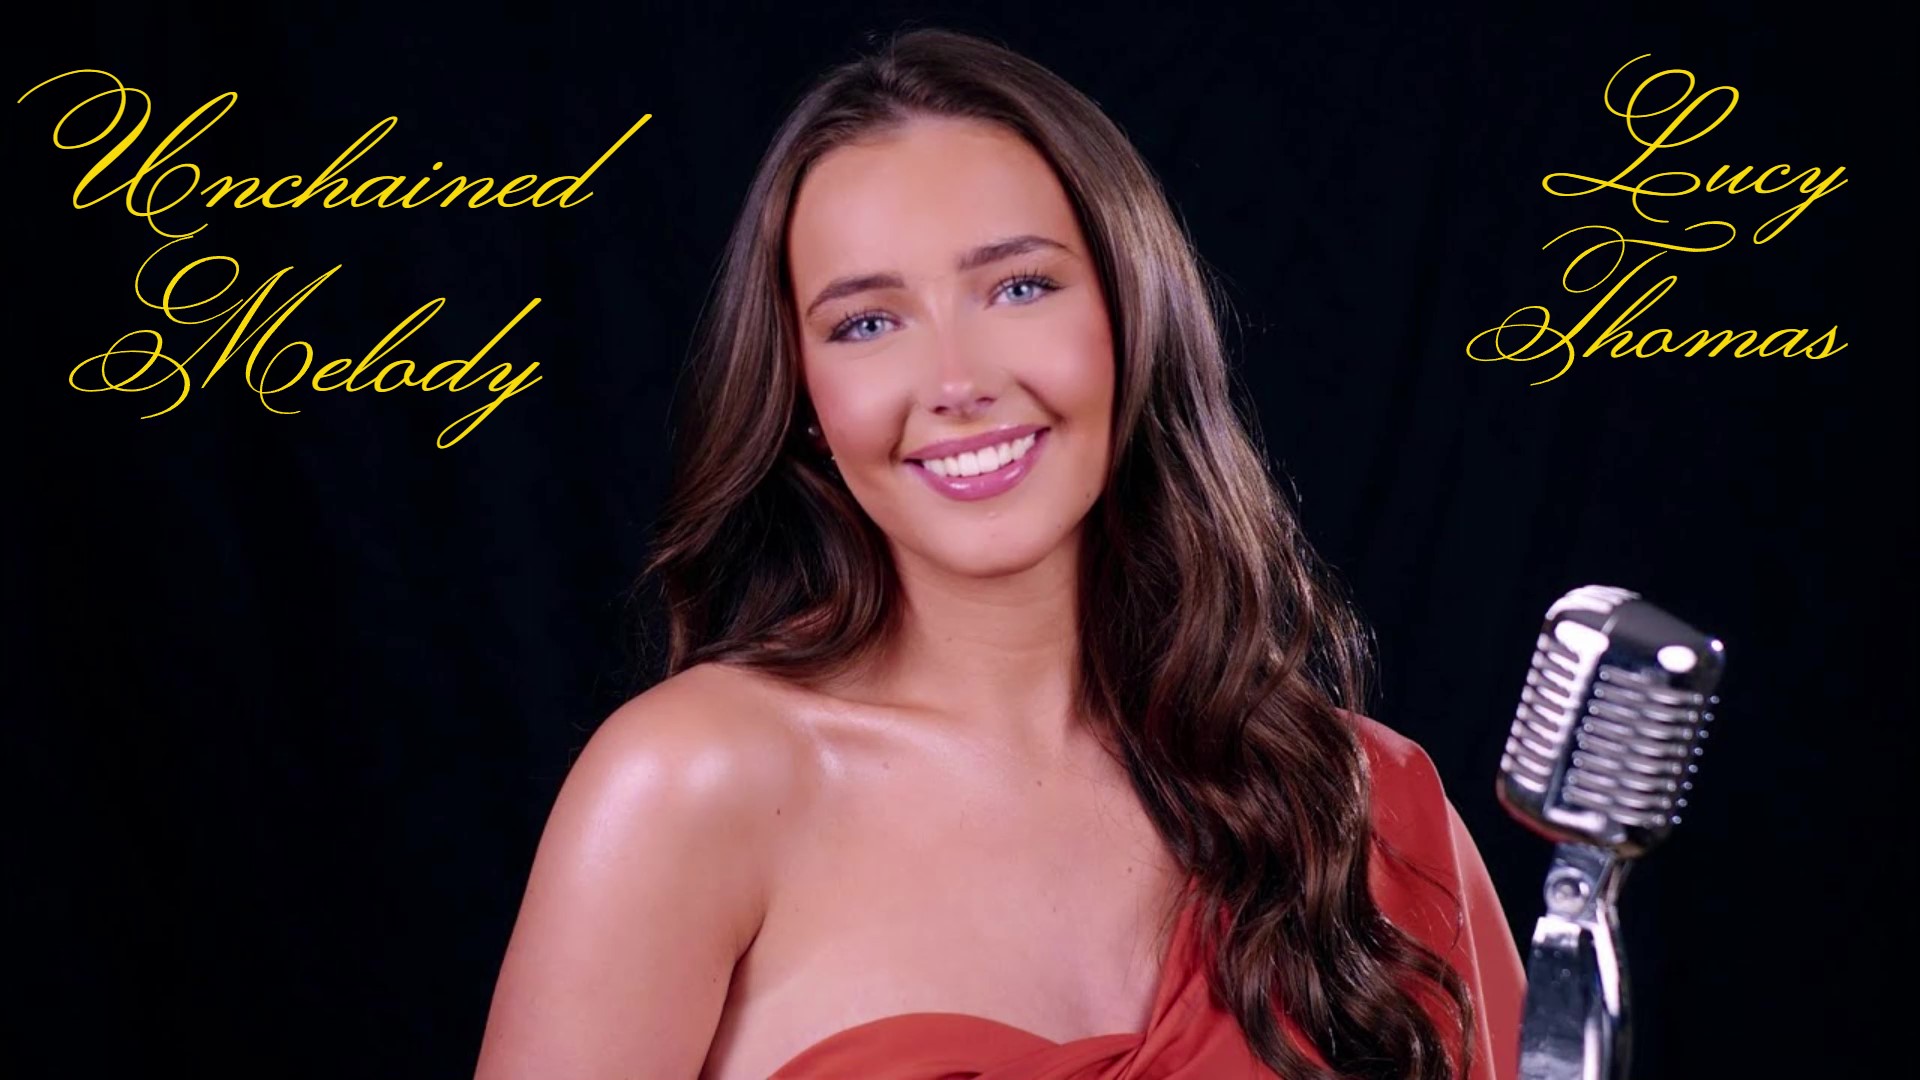 Unchained Melody - Lucy Thomas - (Official Music Video)